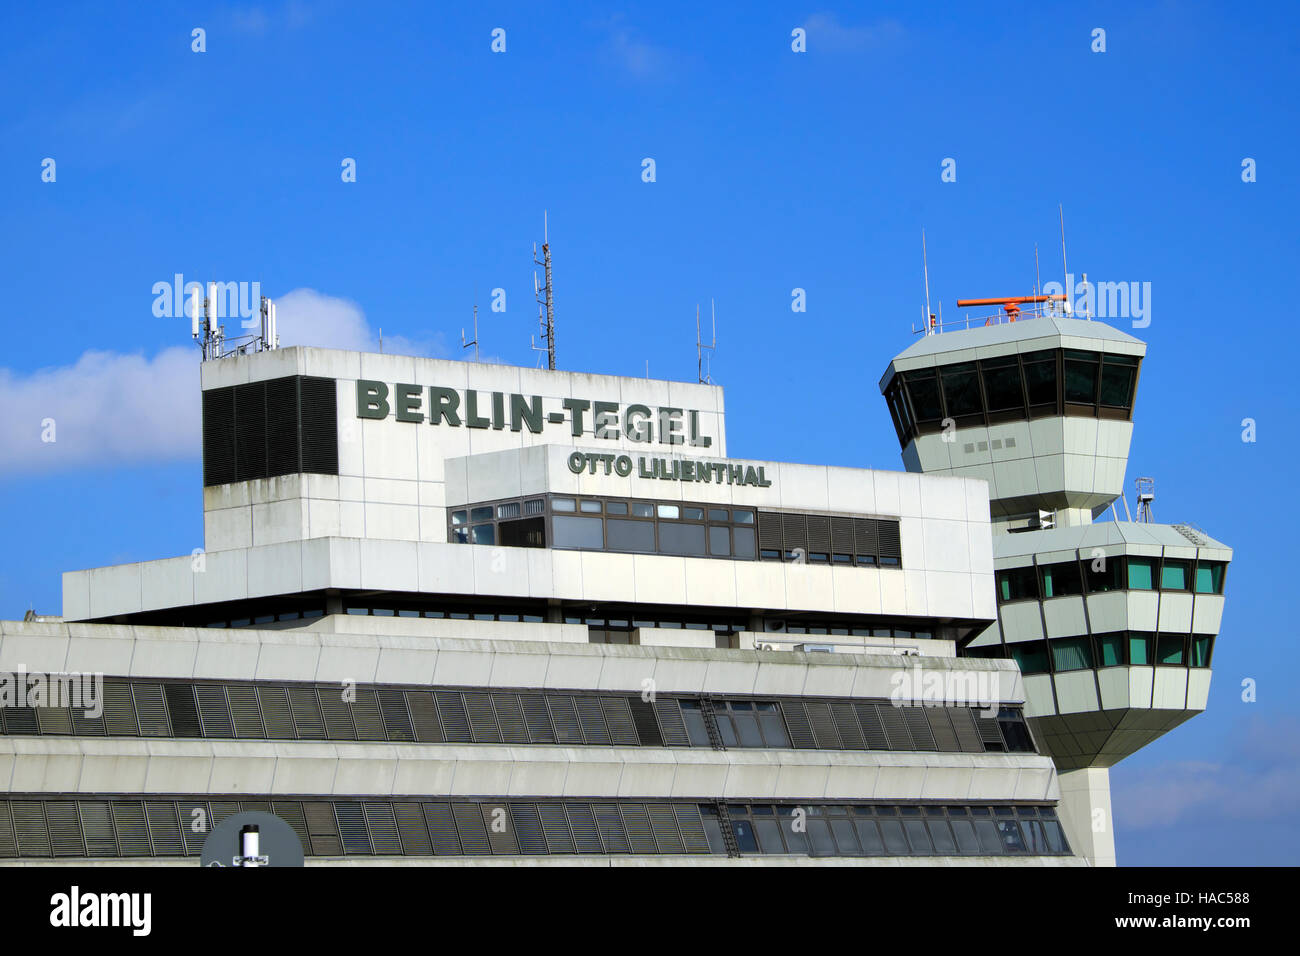 Outside exterior view of Berlin-Tegel Airport Otto Lillienthal sign on control tower building in Berlin Germany Europe EU  KATHY DEWITT Stock Photo